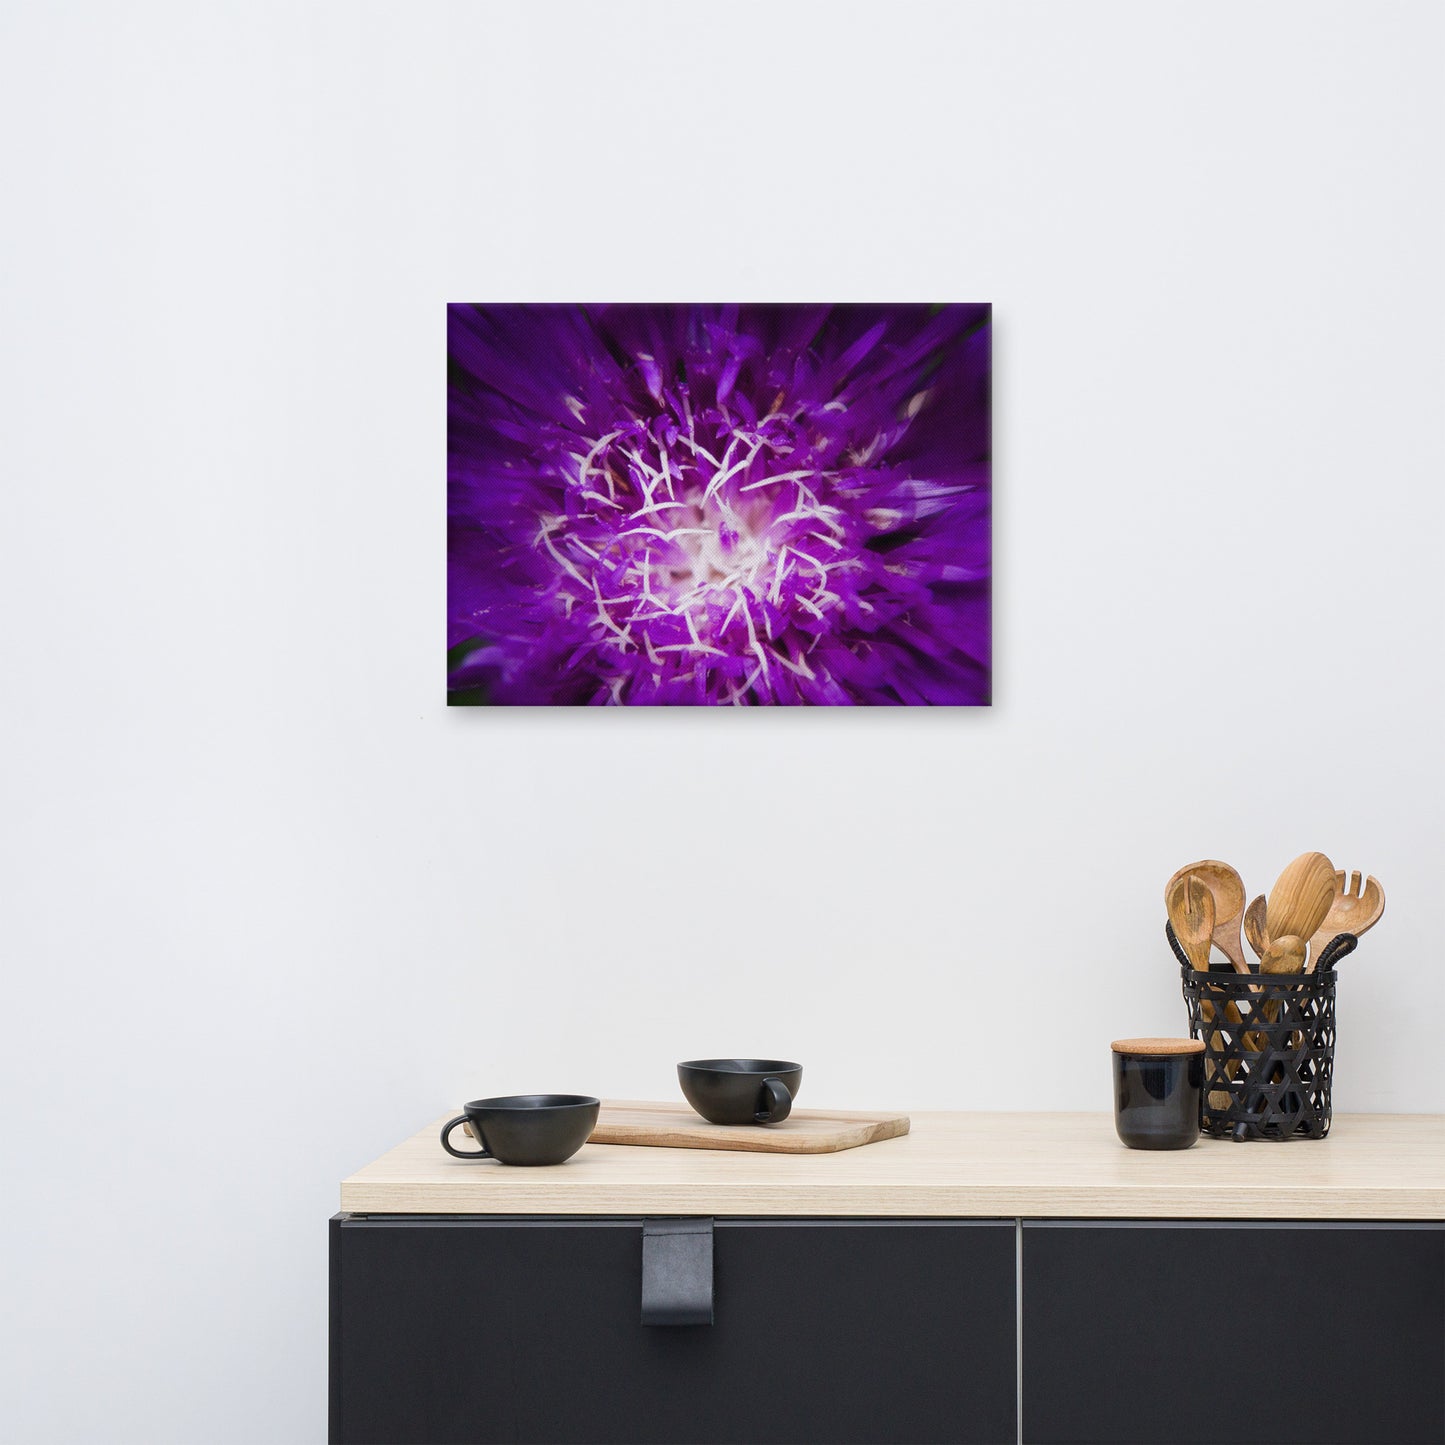 Art For Dining Room Wall Ideas: Dark Purple and White Aster Bloom Close-up Botanical / Floral / Flora / Flowers / Nature Photograph Canvas Wall Art Print - Artwork